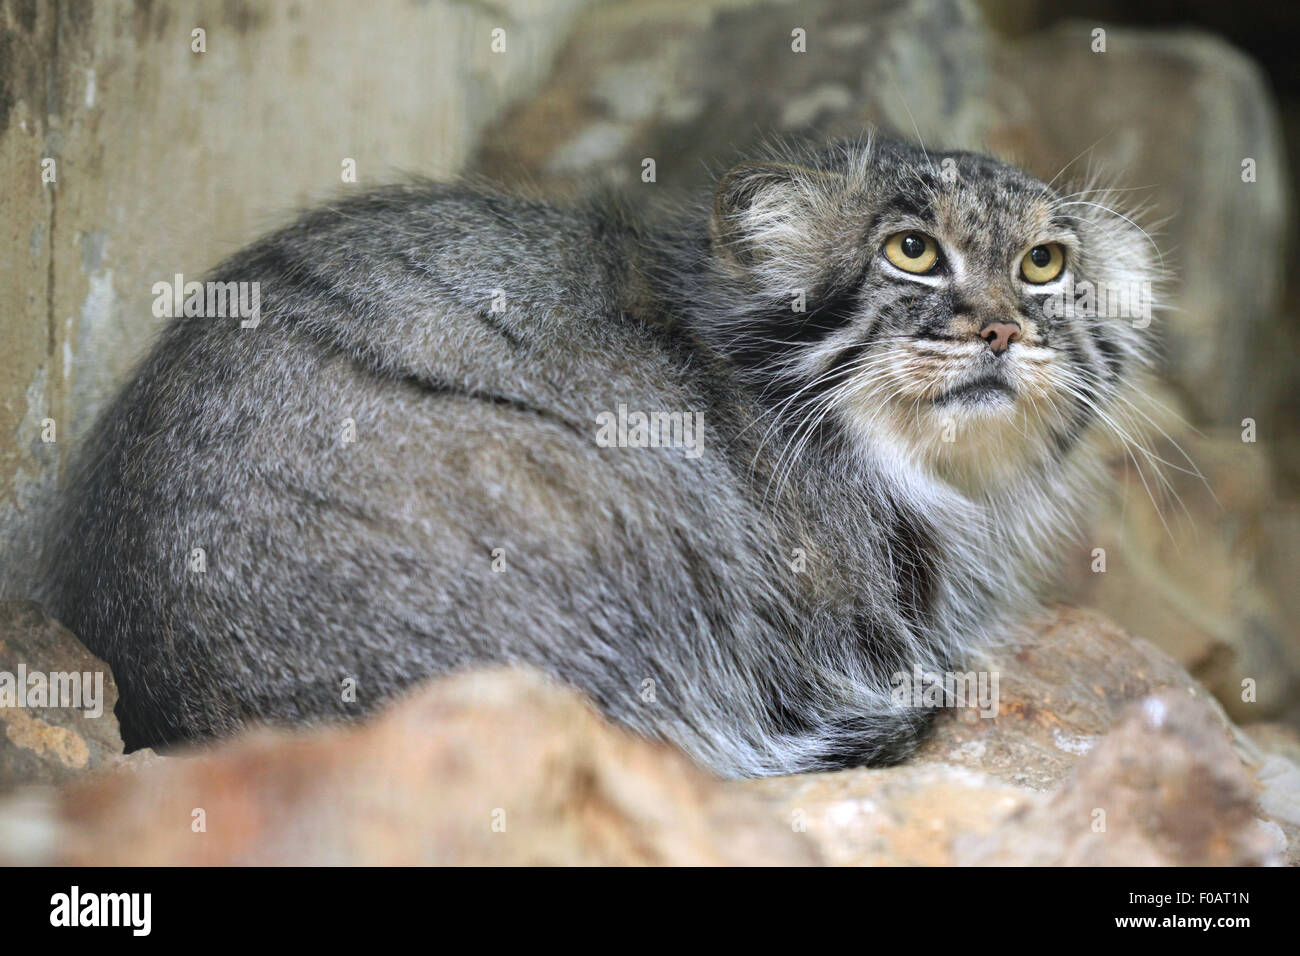 Pallas's cat (Otocolobus manul), also known as the manul at Chomutov Zoo in Chomutov, North Bohemia, Czech Republic. Stock Photo